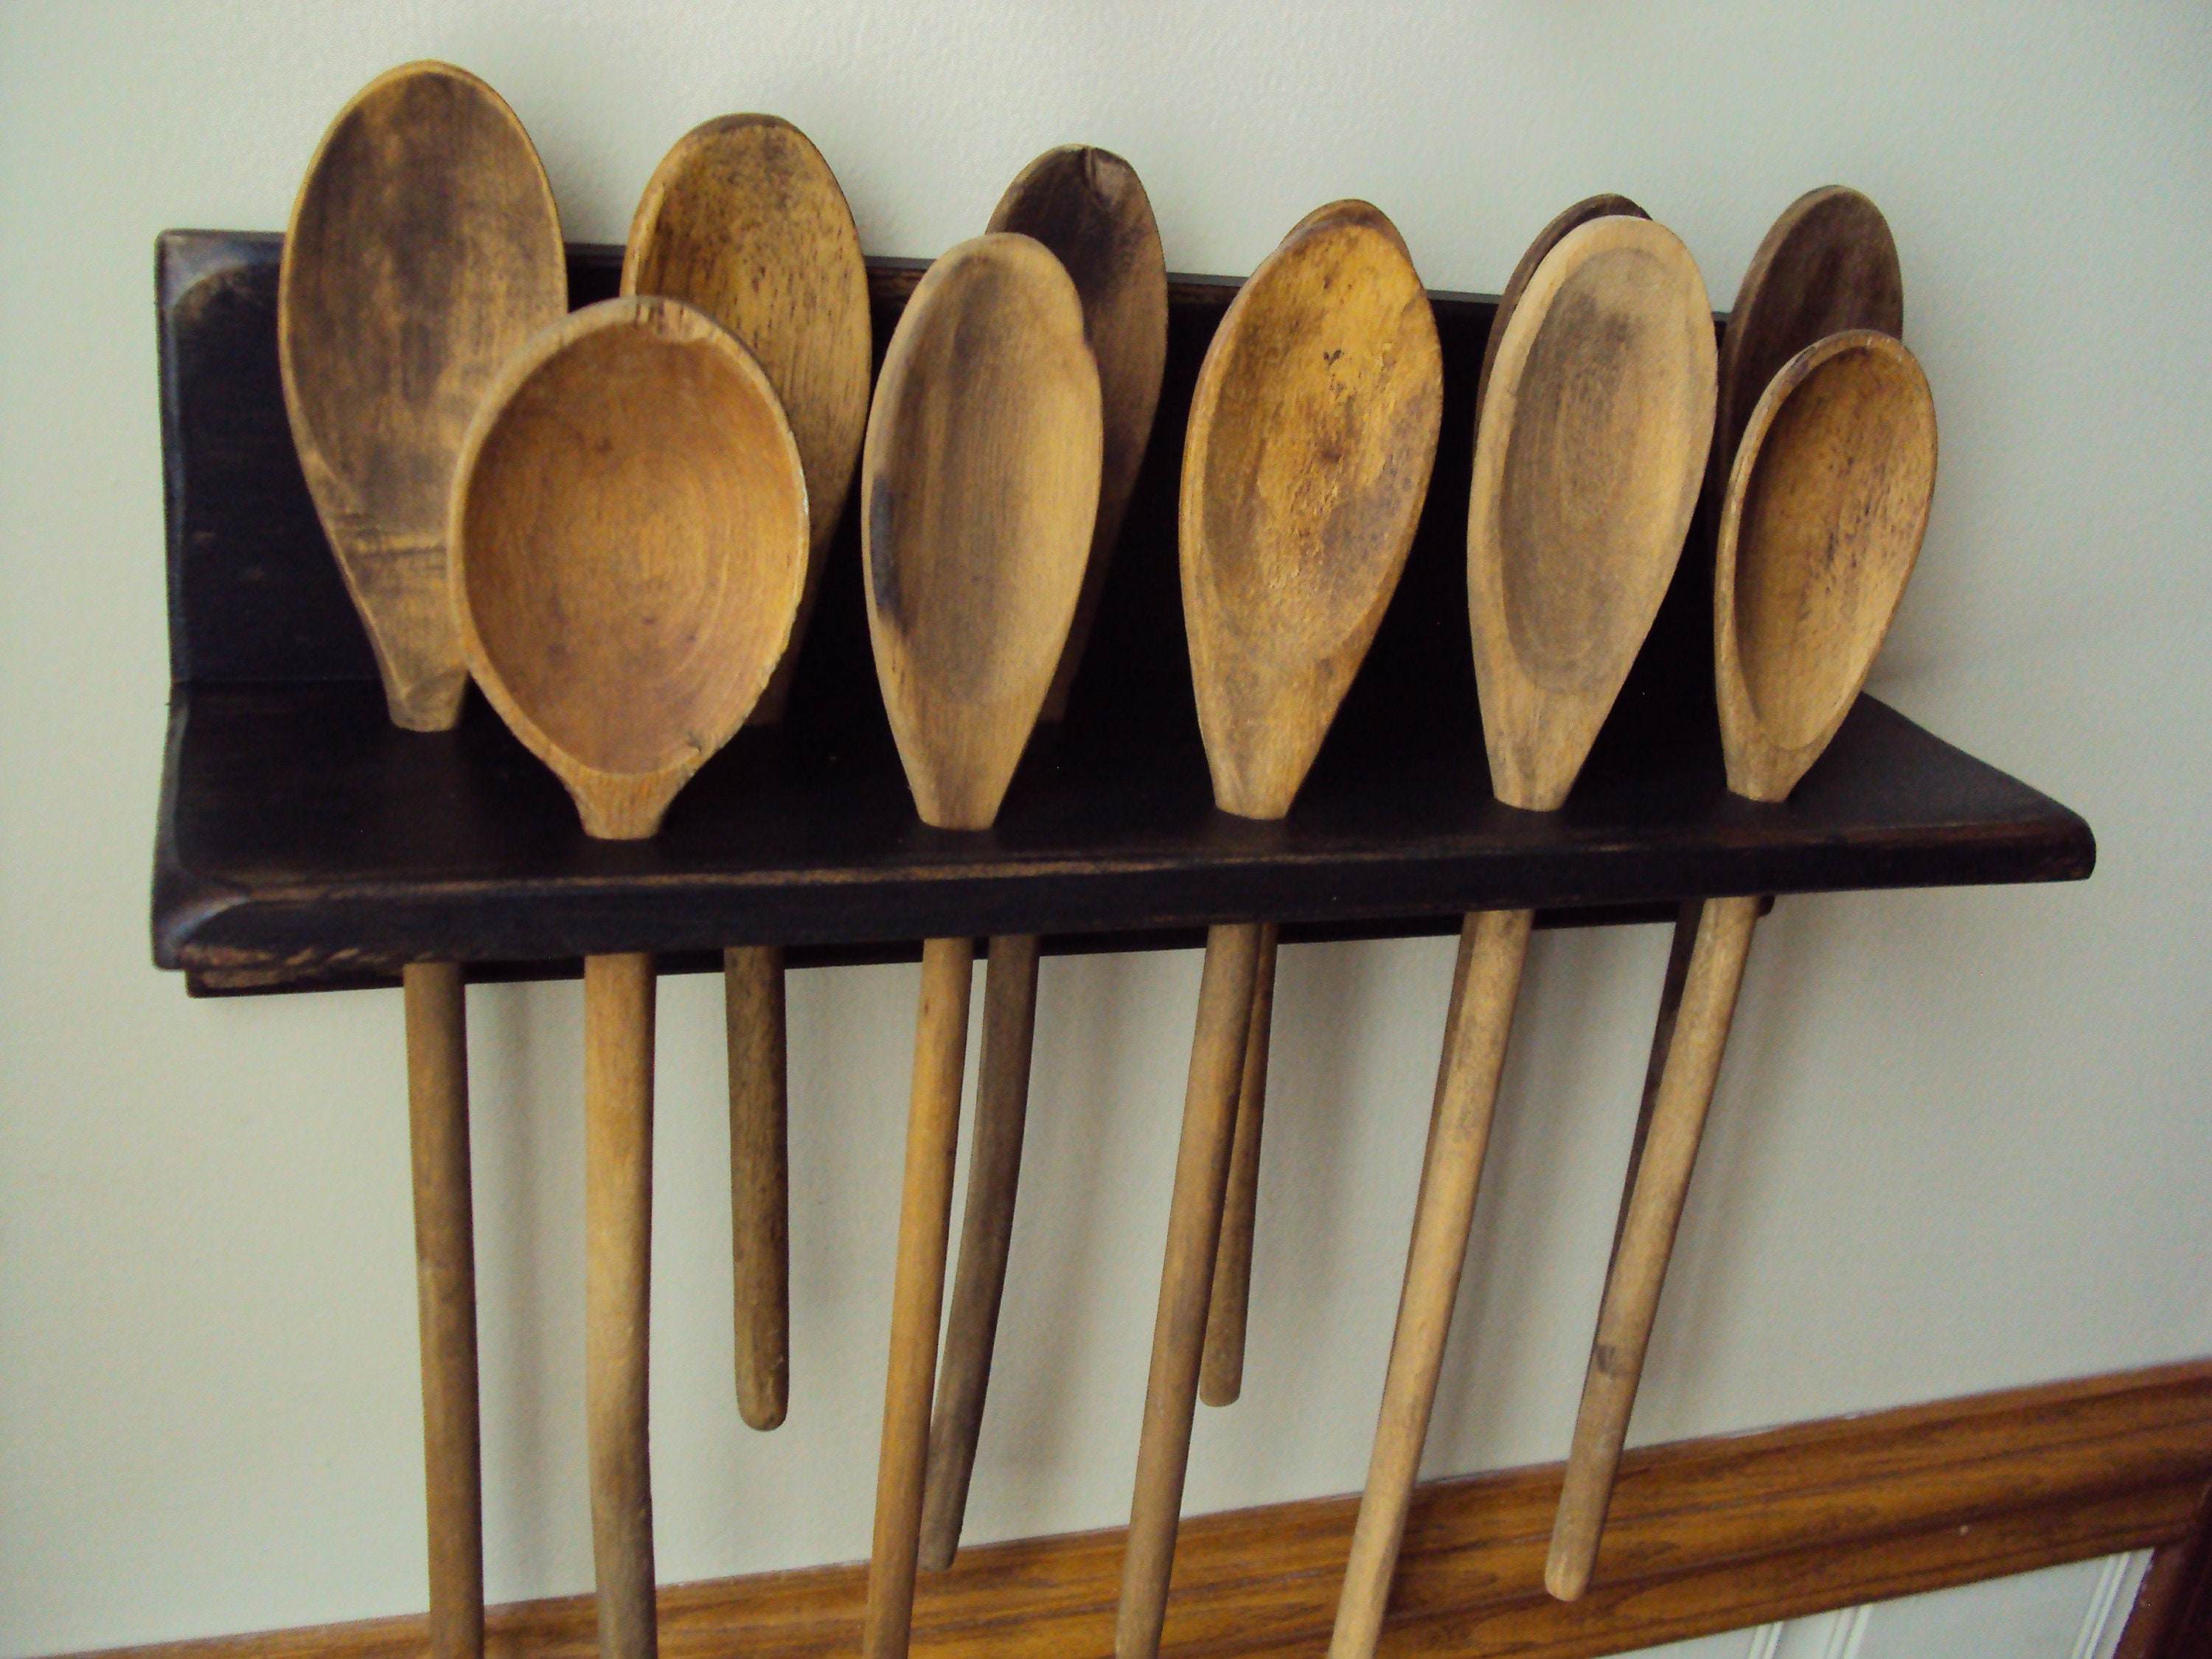 How to Make a Measuring Spoon Rack from Barn Wood - Adventures of a DIY Mom